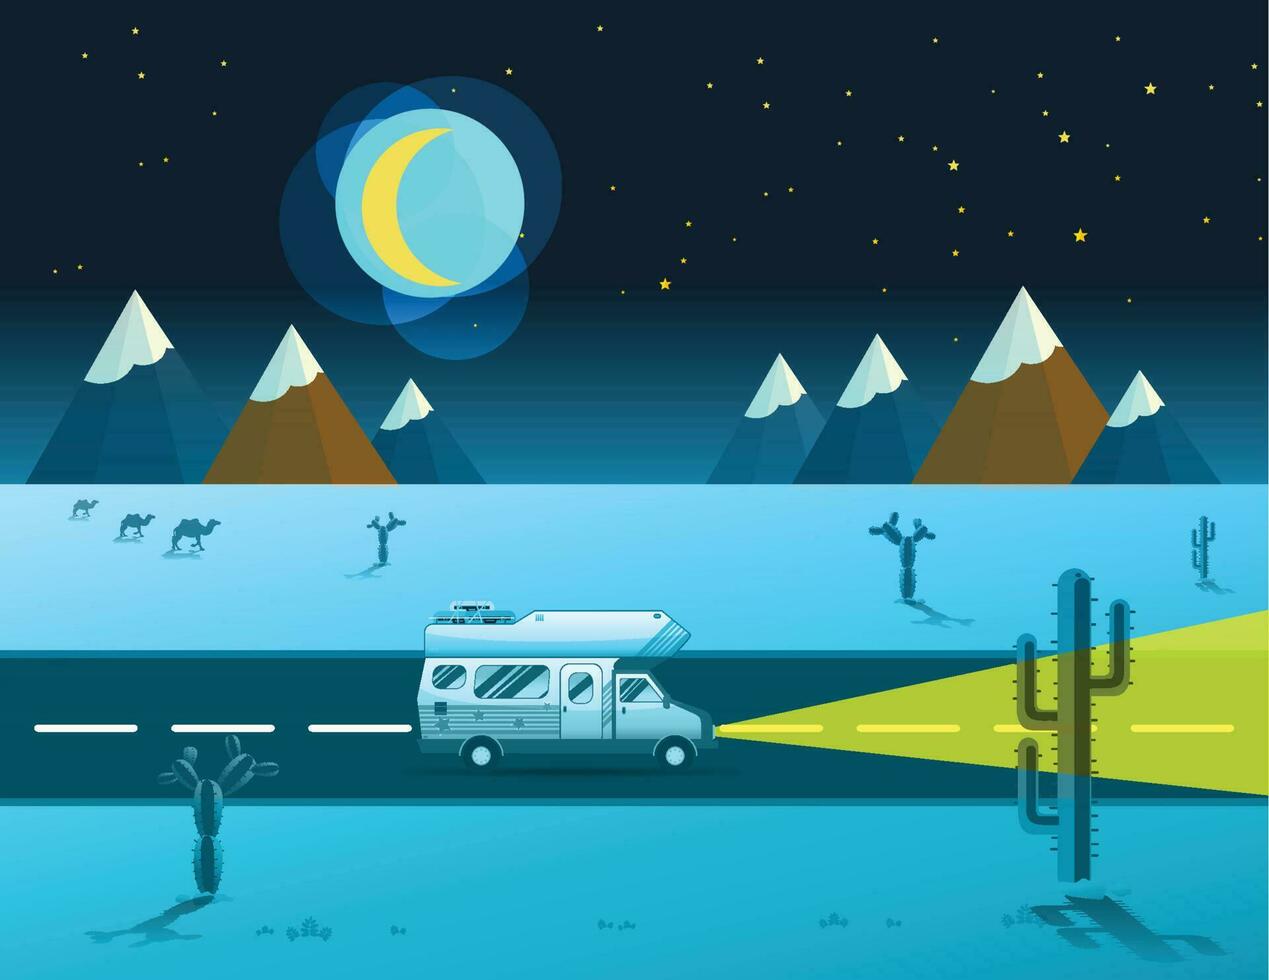 traveler truck driving on the road to desert and mountainslandscape vector